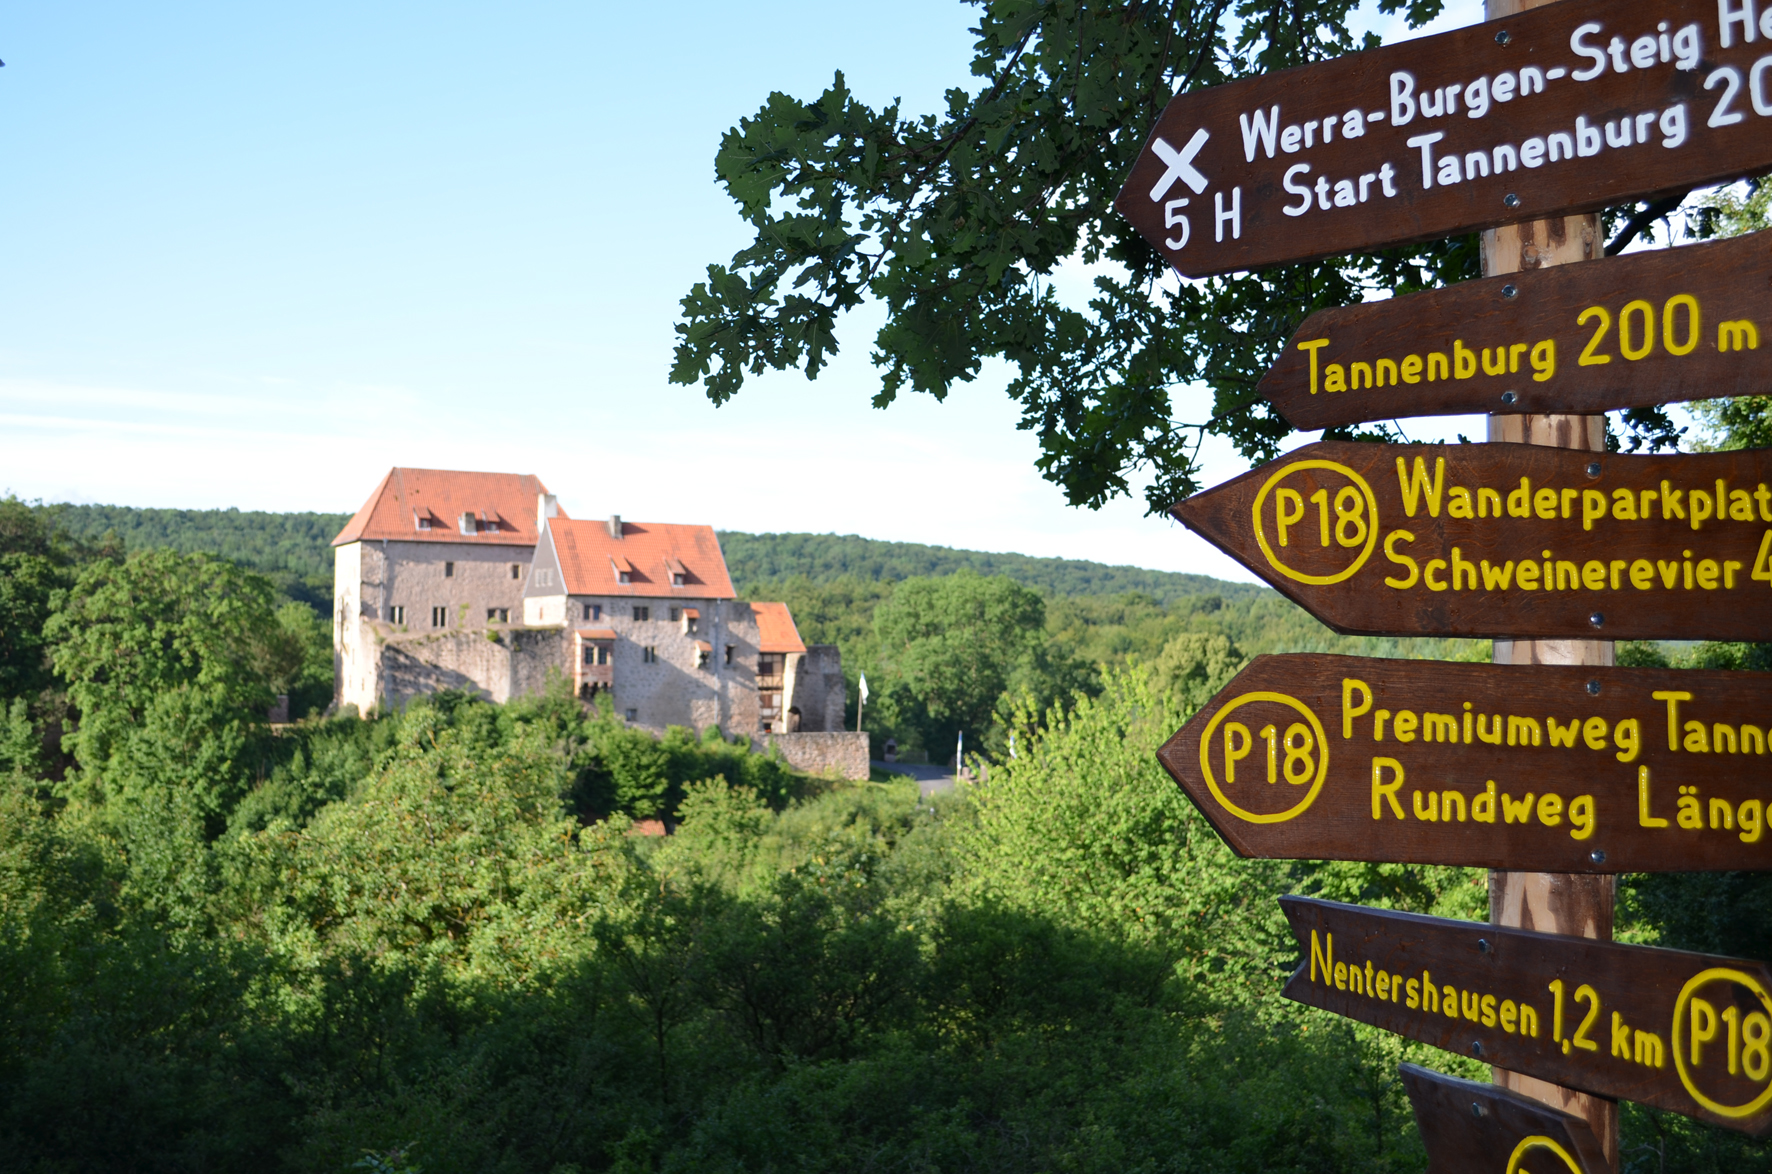 View of a castle in a forest with lots of signposts pointing in all directions in the foreground